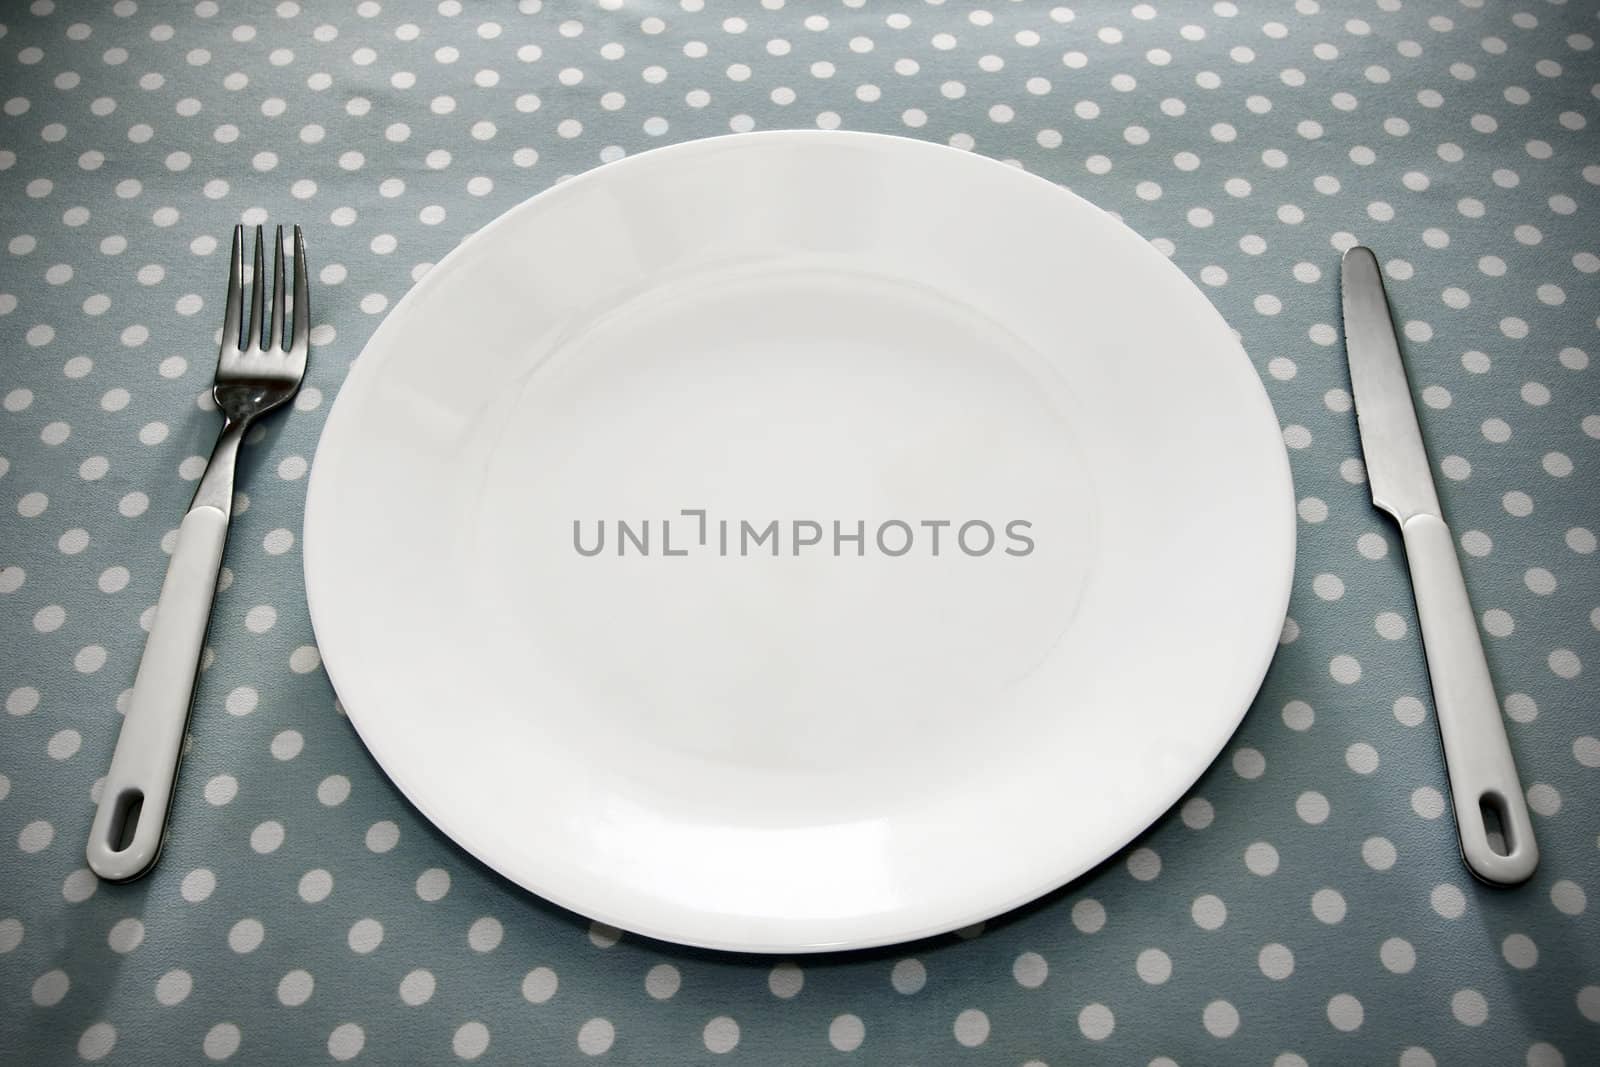 Empty white dinner plate with ustensils on fun grey polka dot tablecloth.